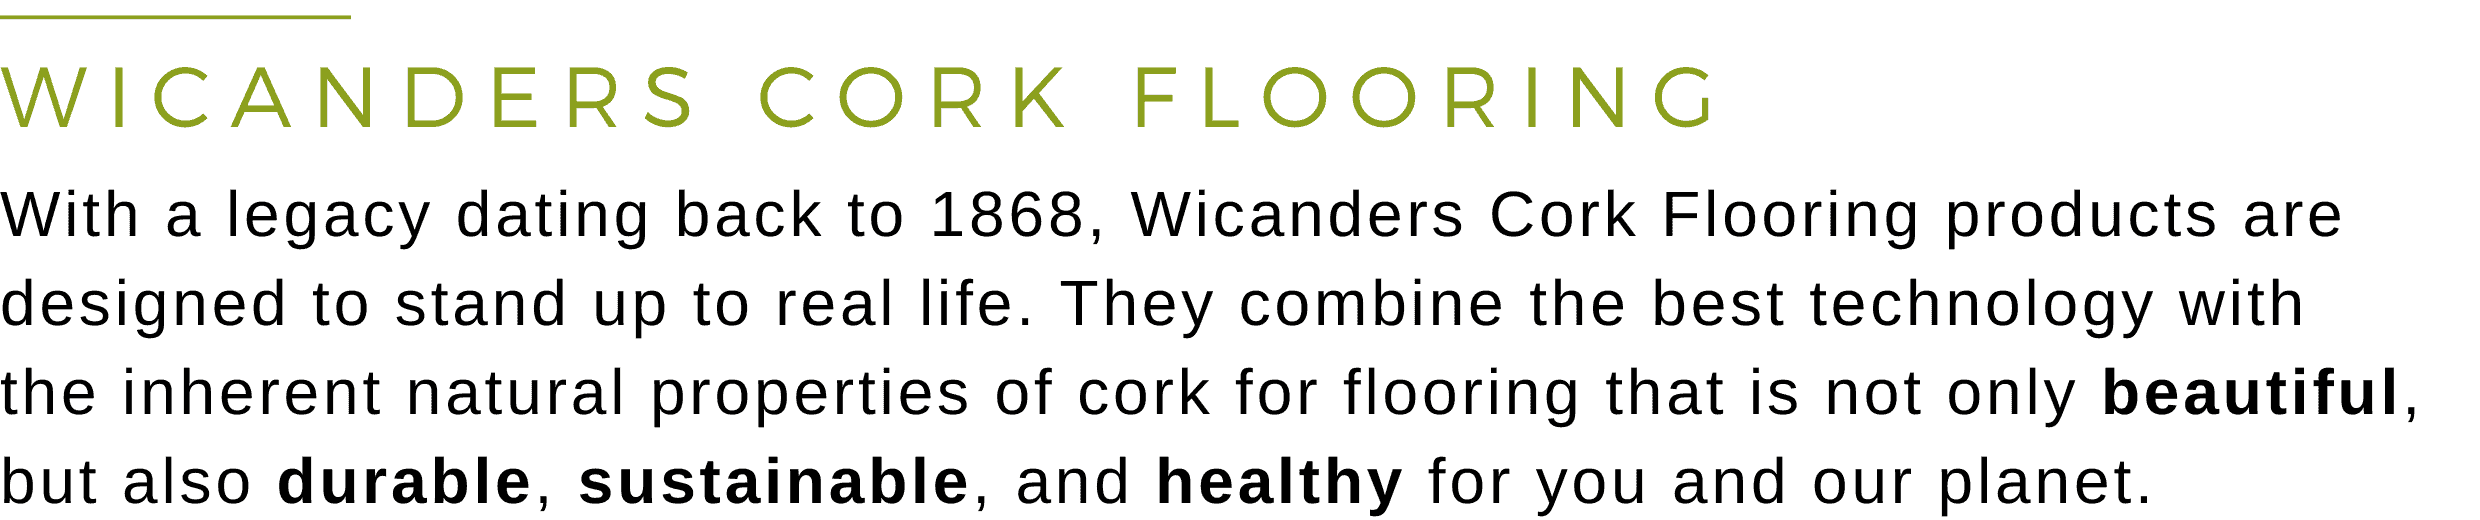 Wicanders Cork Flooring - With a legacy dating back to 1868, Wicanders Cork Flooring products are designed to stand up to real life. They combine the best technology with the inherent natural properties of cork for flooring that is not only beautiful, but also durable, sustainable, and healthy for you and our planet.